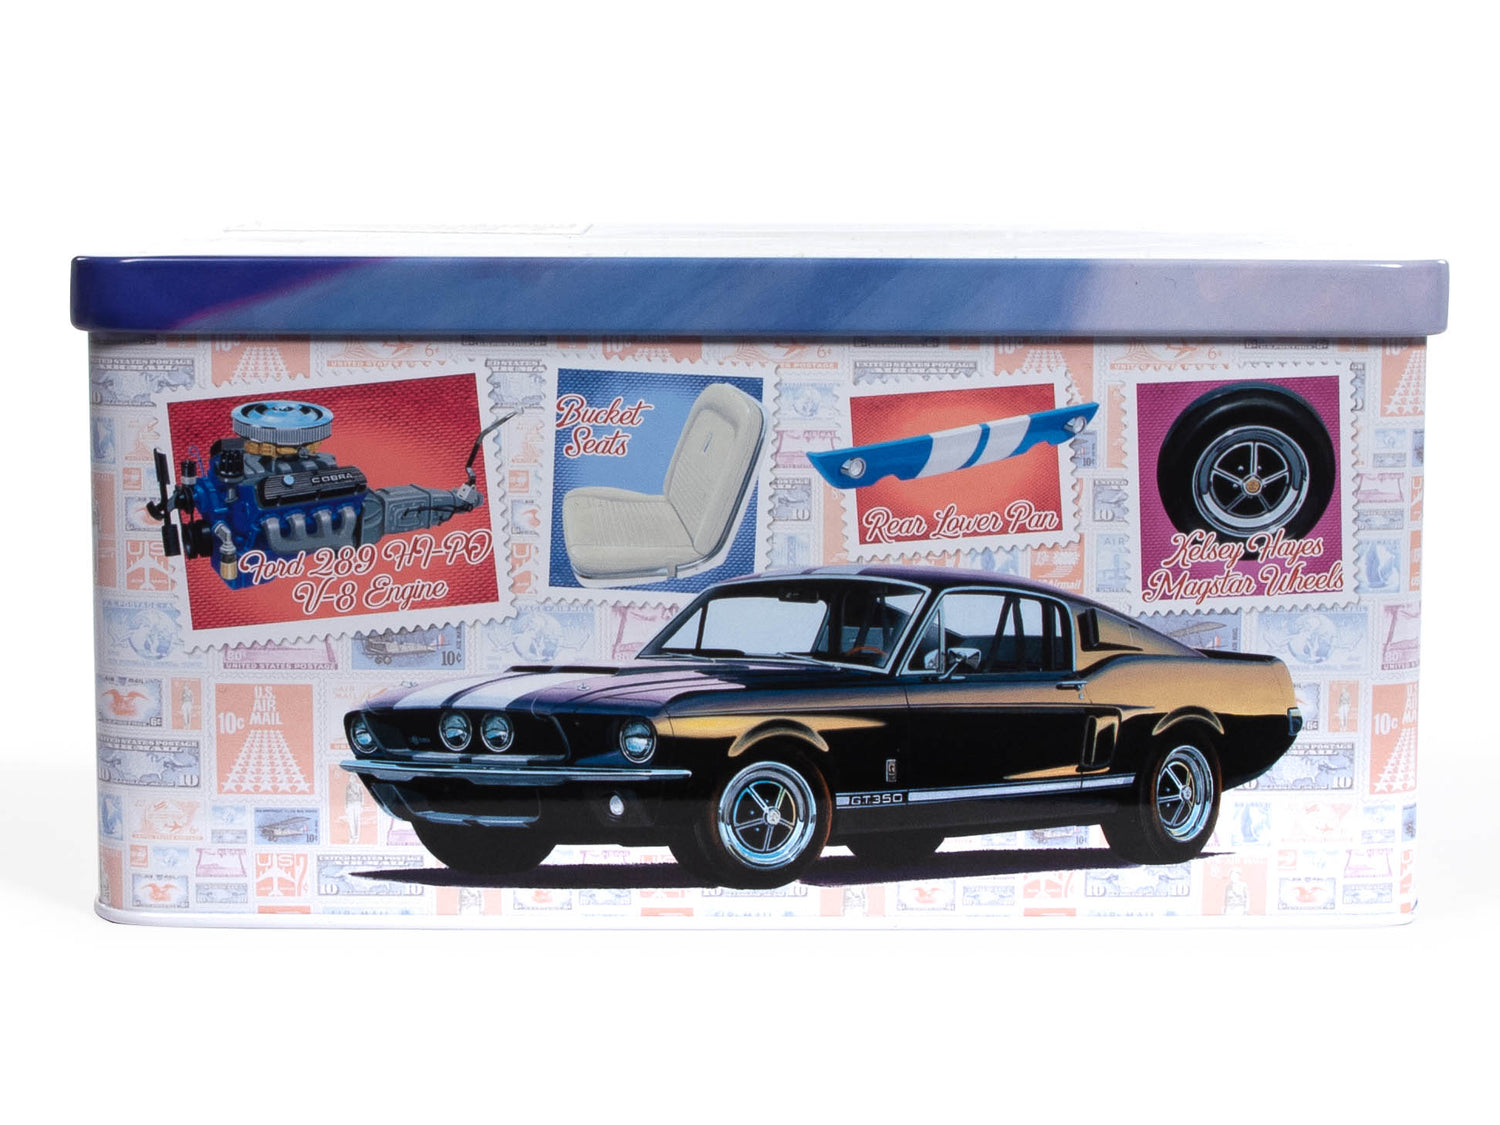 Ford Mustang and Shelby Model kits. Revell, AMT, polar Lights.